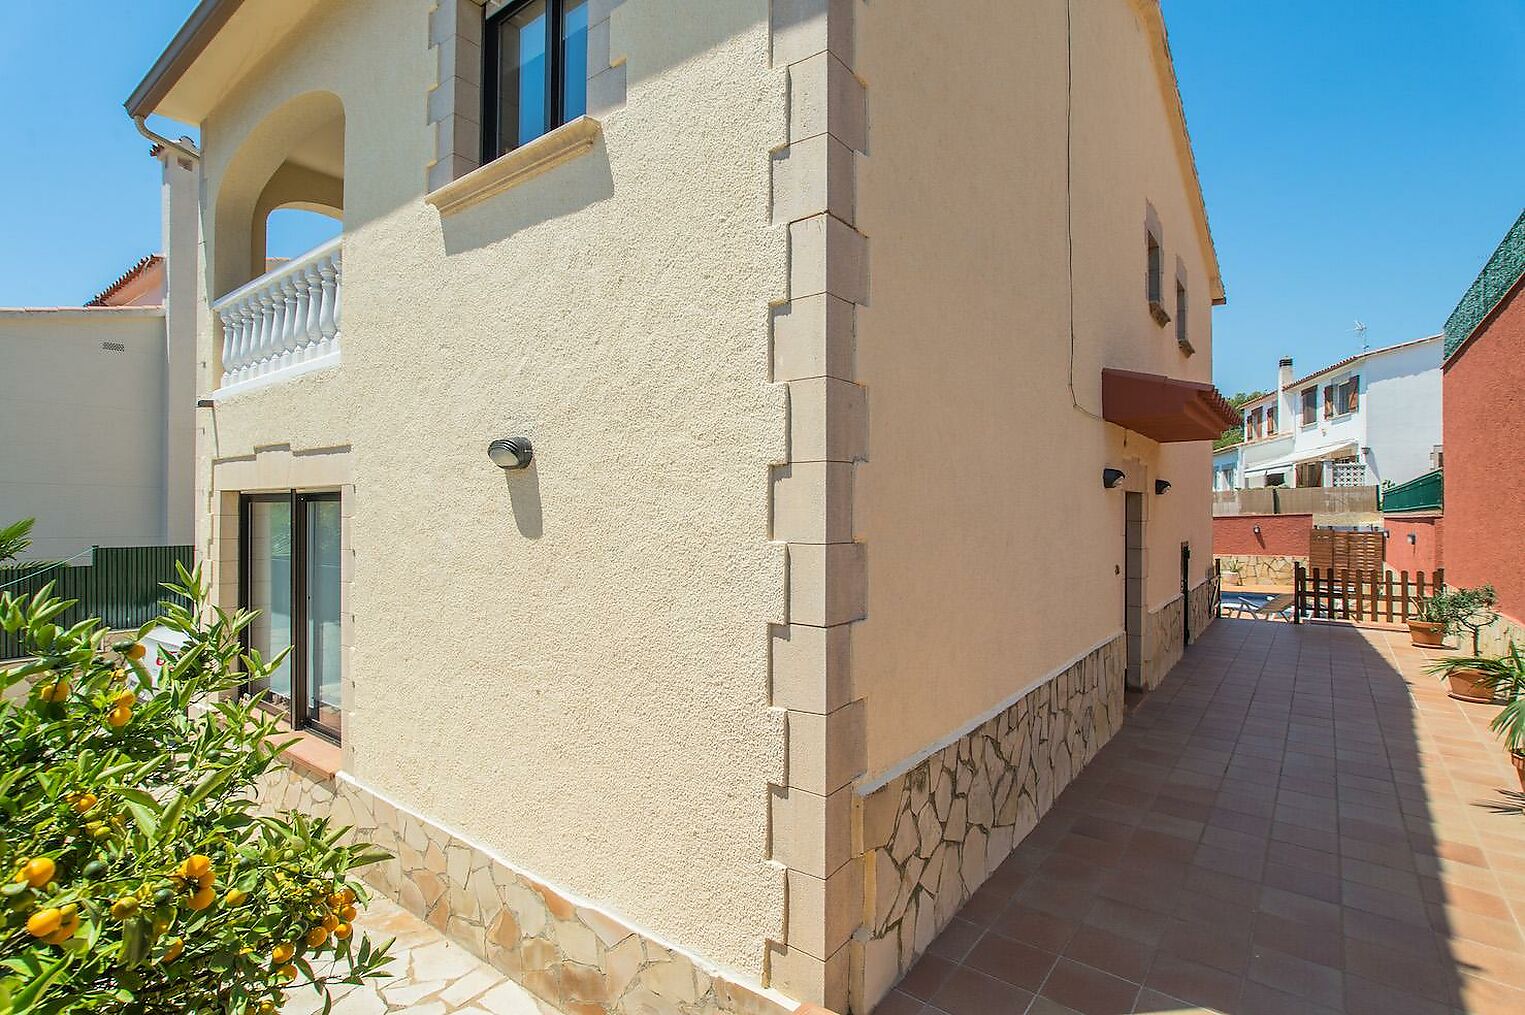 A superbly presented villa in the heart of the beautiful pueblo of Castell  d'Aro.